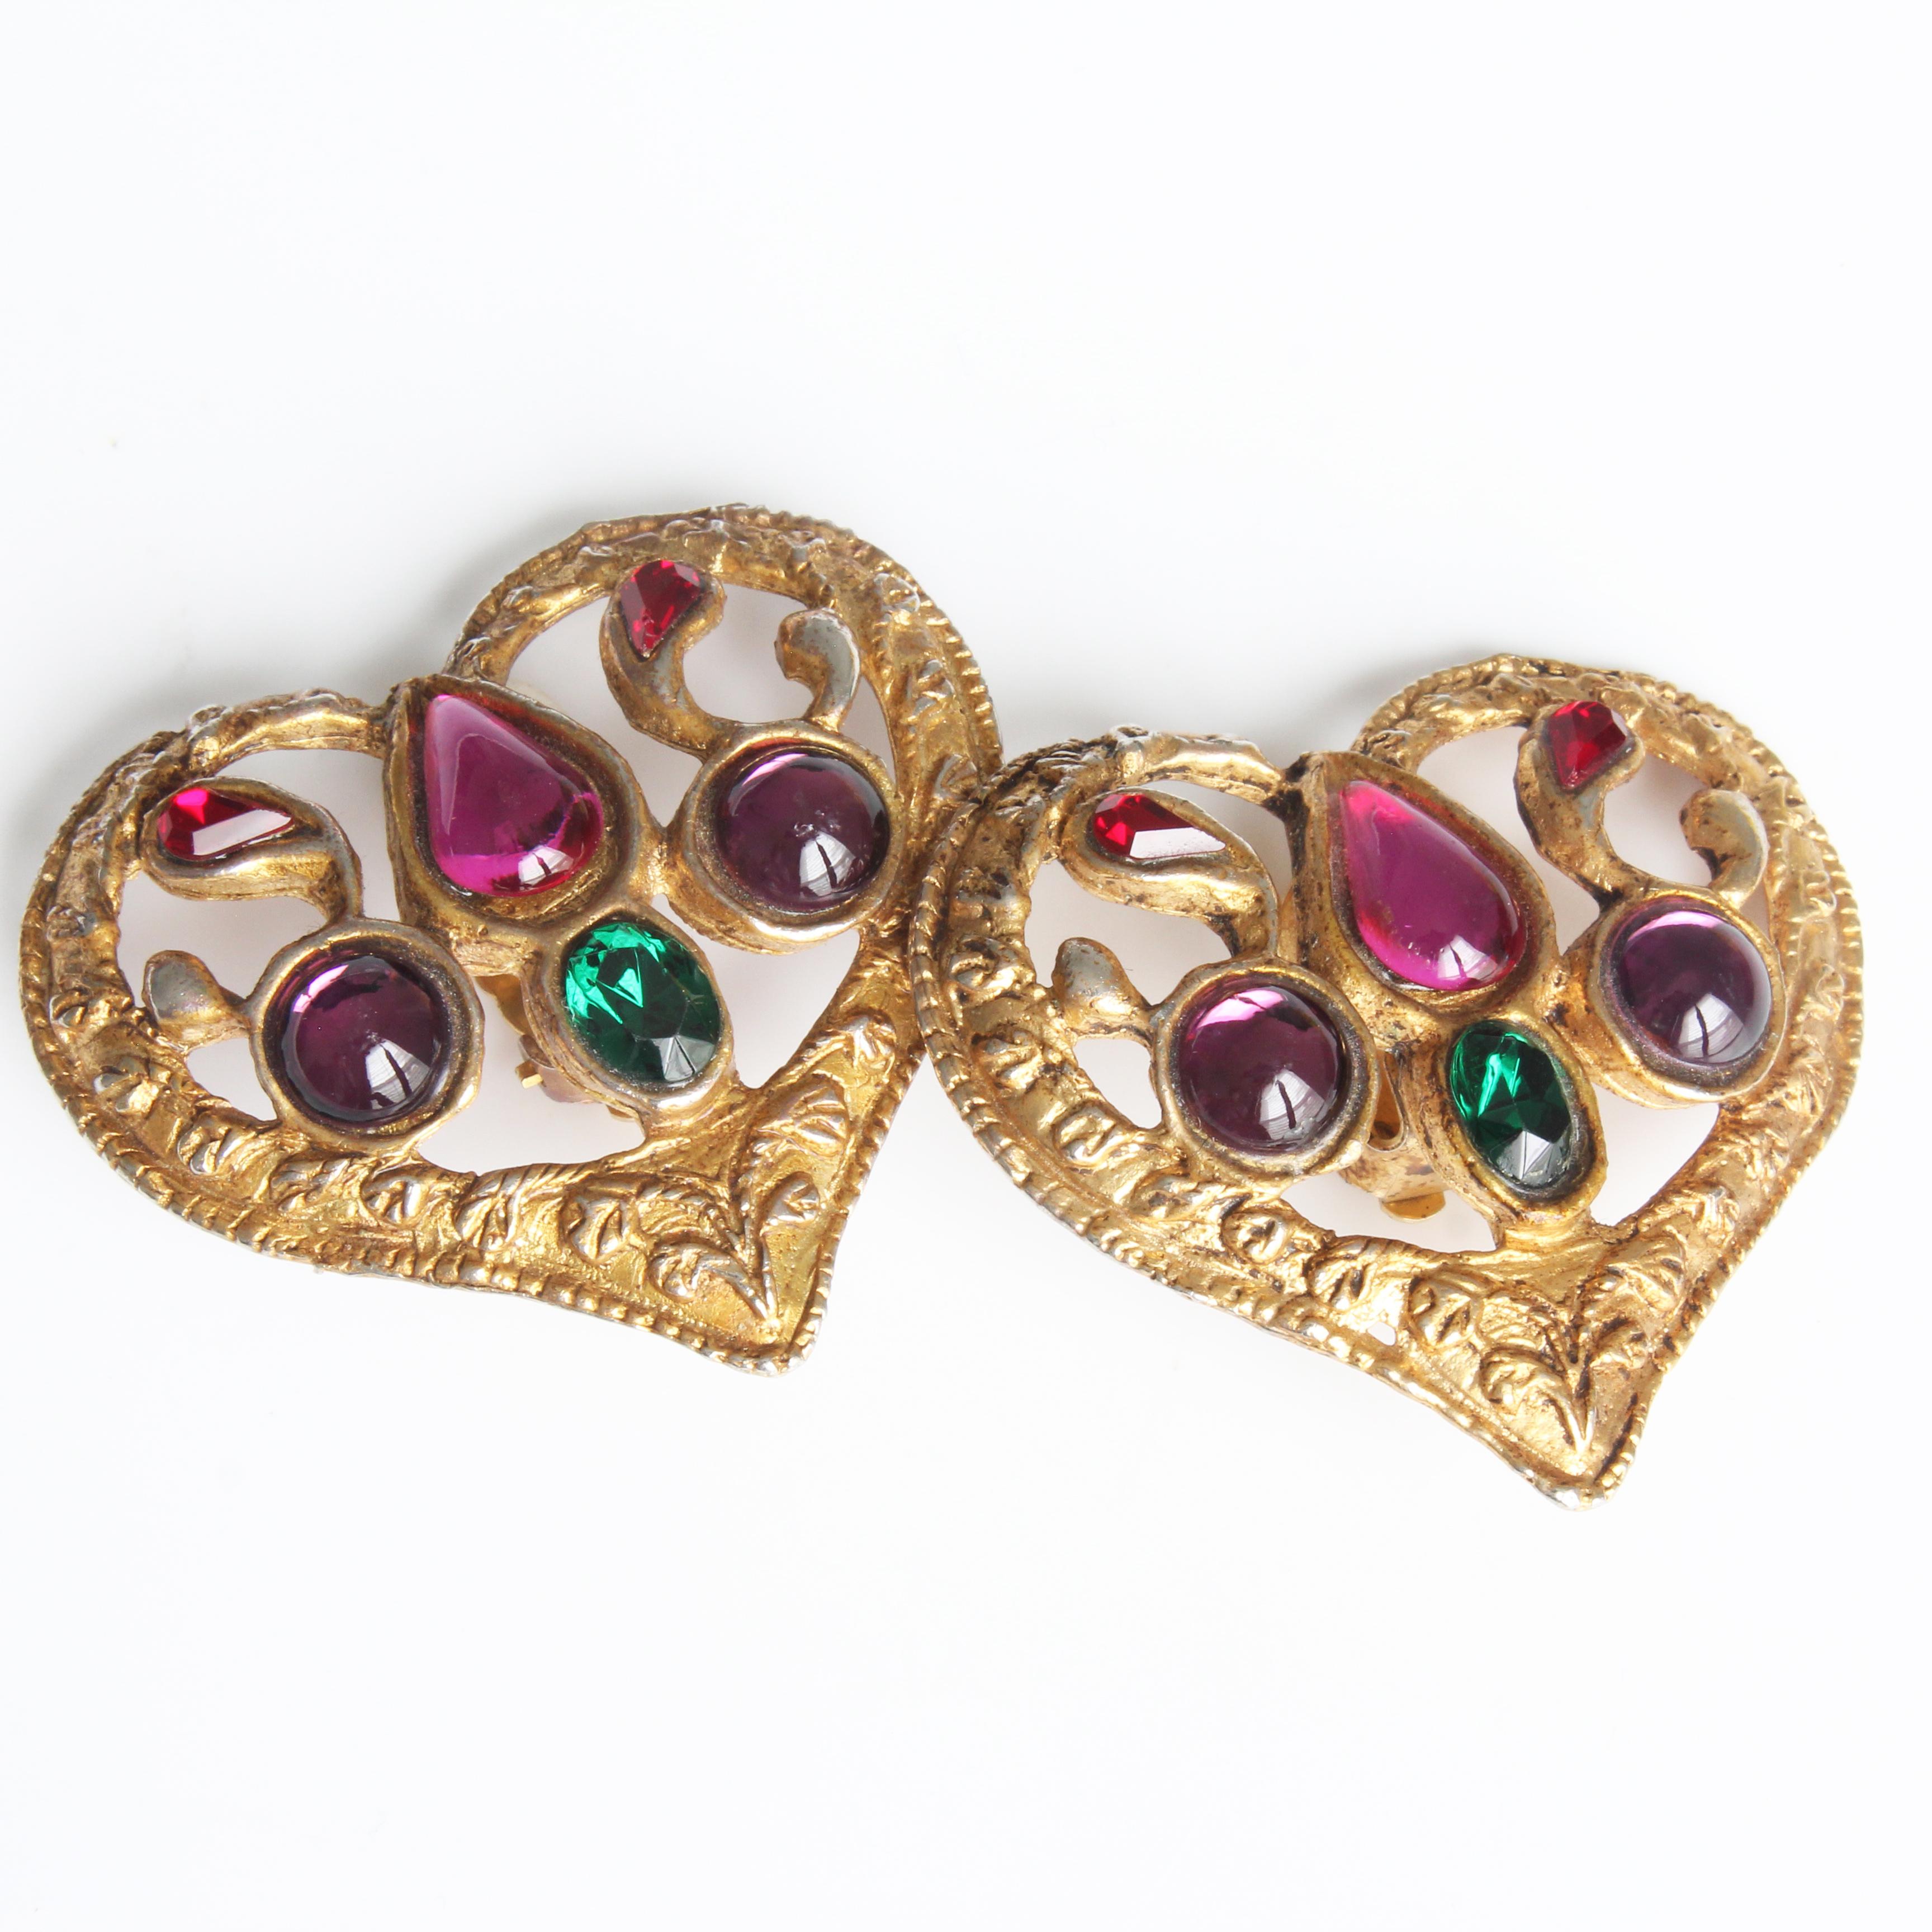 Preowned vintage and rare Christian Lacroix oversized heart-shaped earrings with colorful cabochons, likely made in the 90s.  Made from gold tone textured metal, these feature brilliant cabochons in shades of amethyst, pink, ruby red and emerald. 